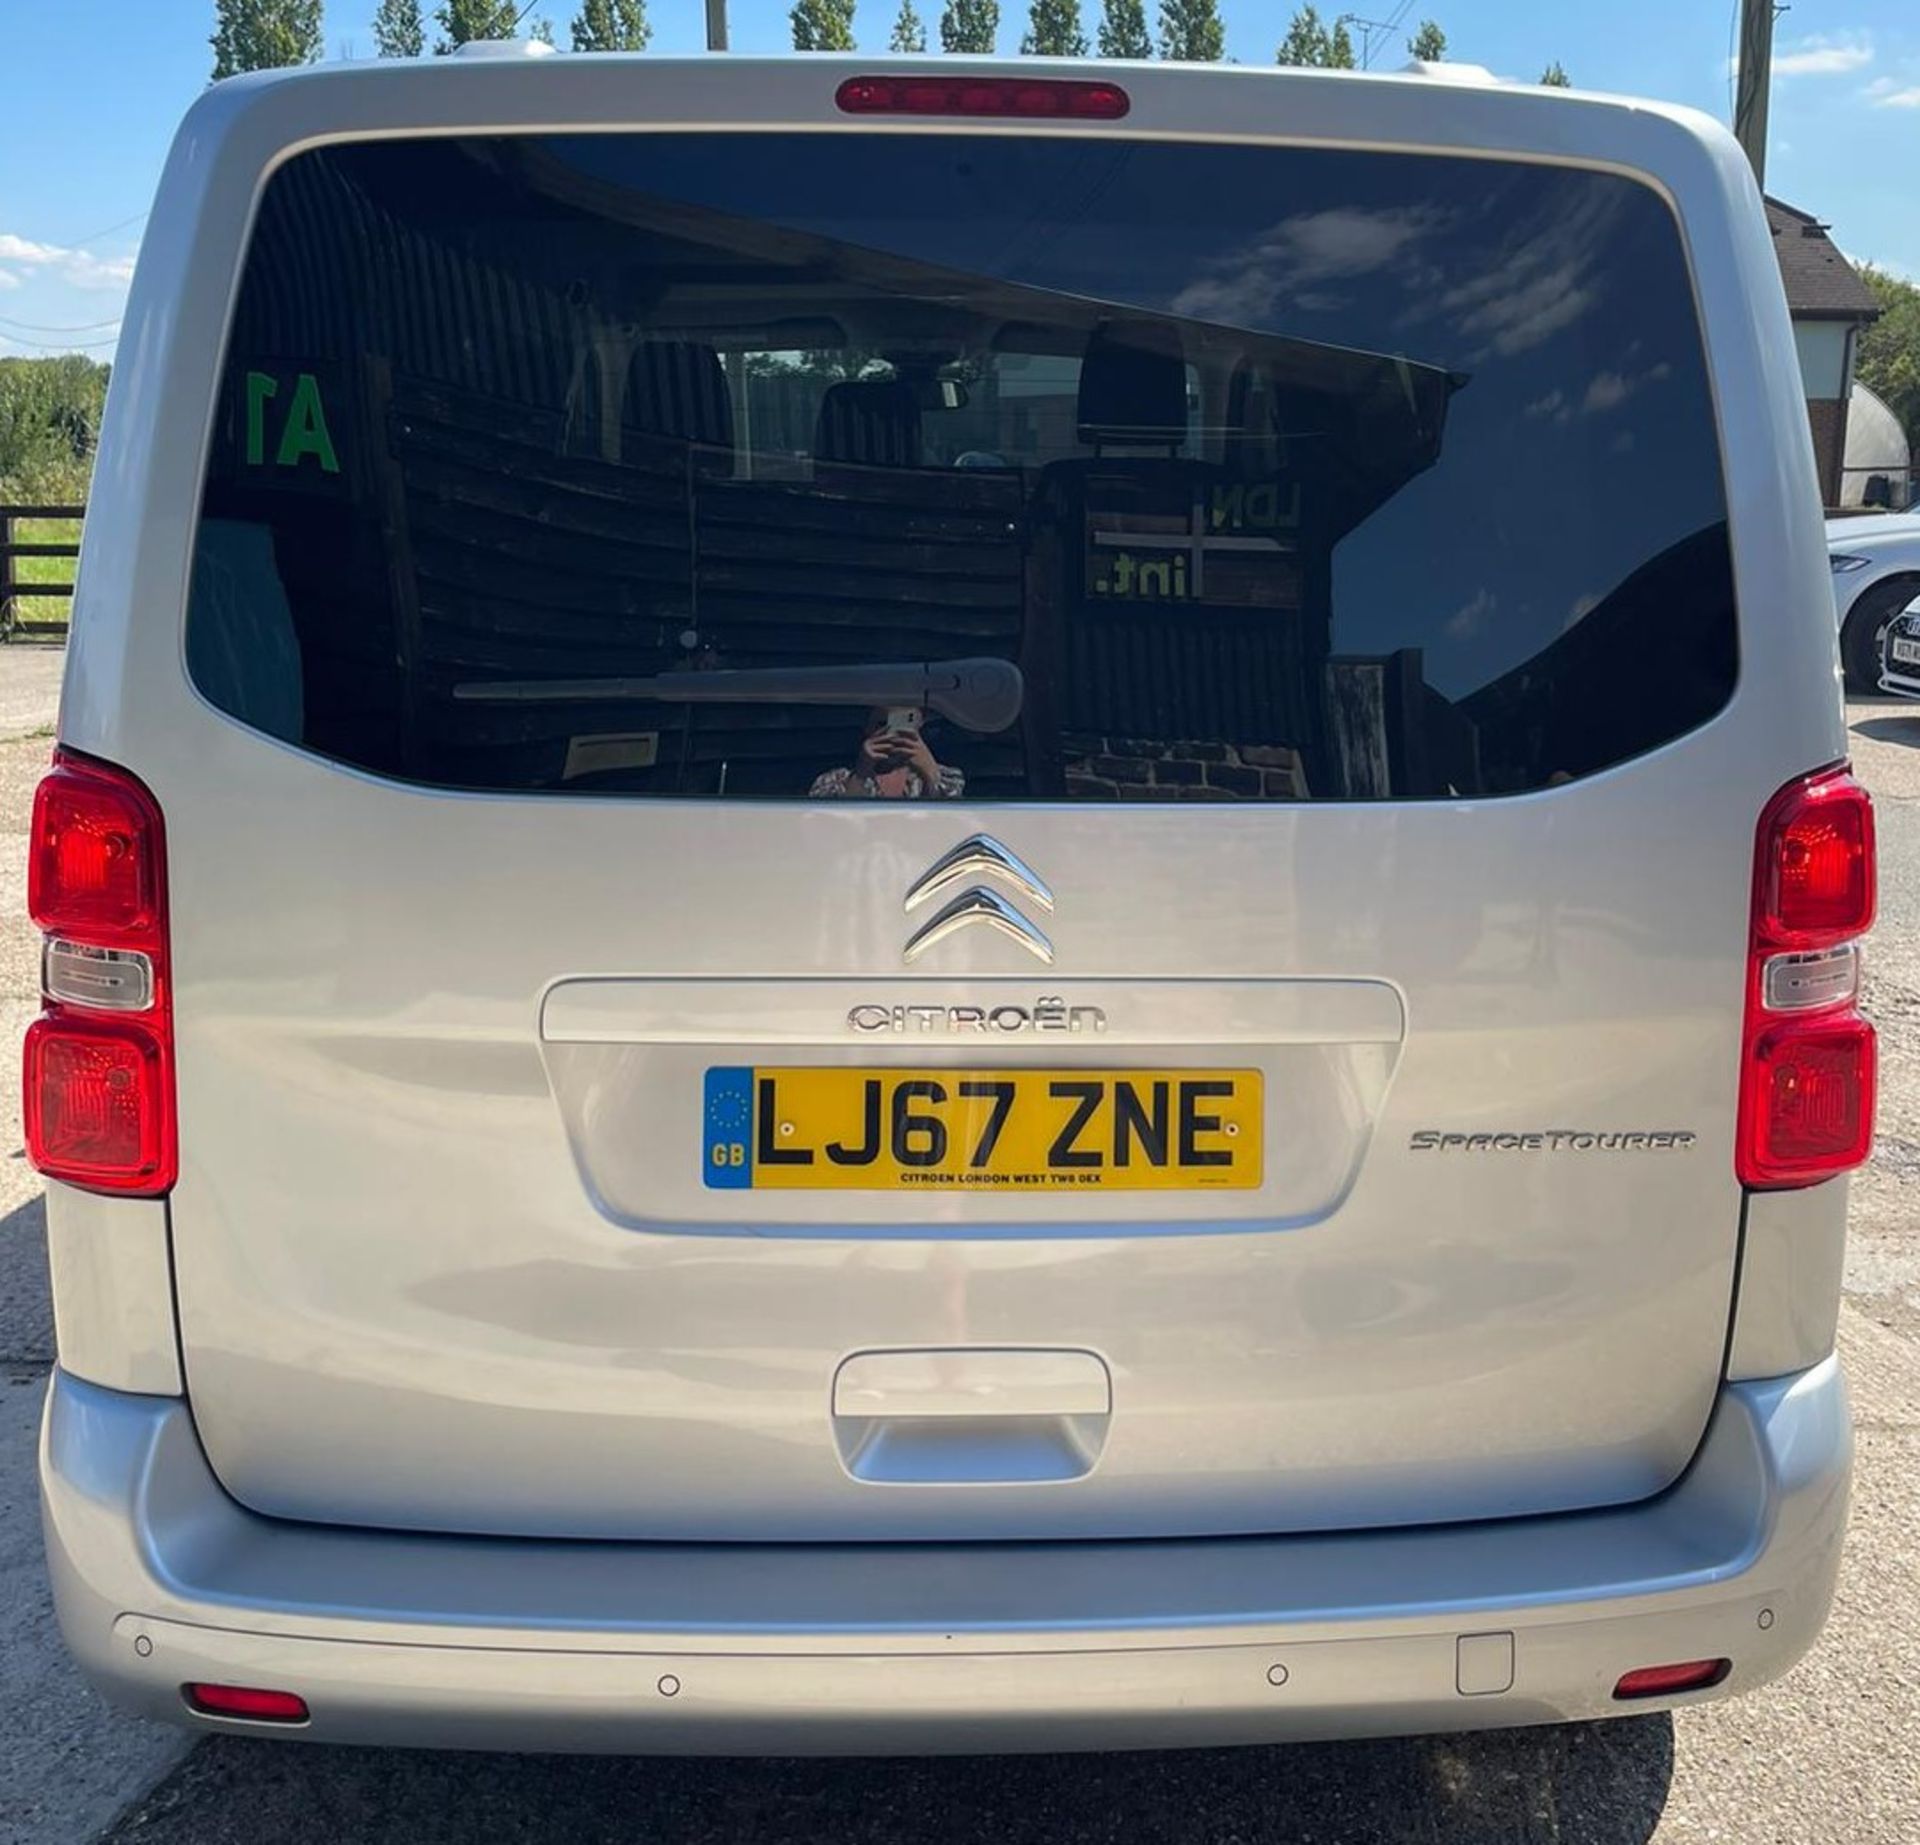 Citroen Spacetourer Business BHDI S/S 9-seater MPV, registration number: LJ67 ZNE with approximately - Image 5 of 14